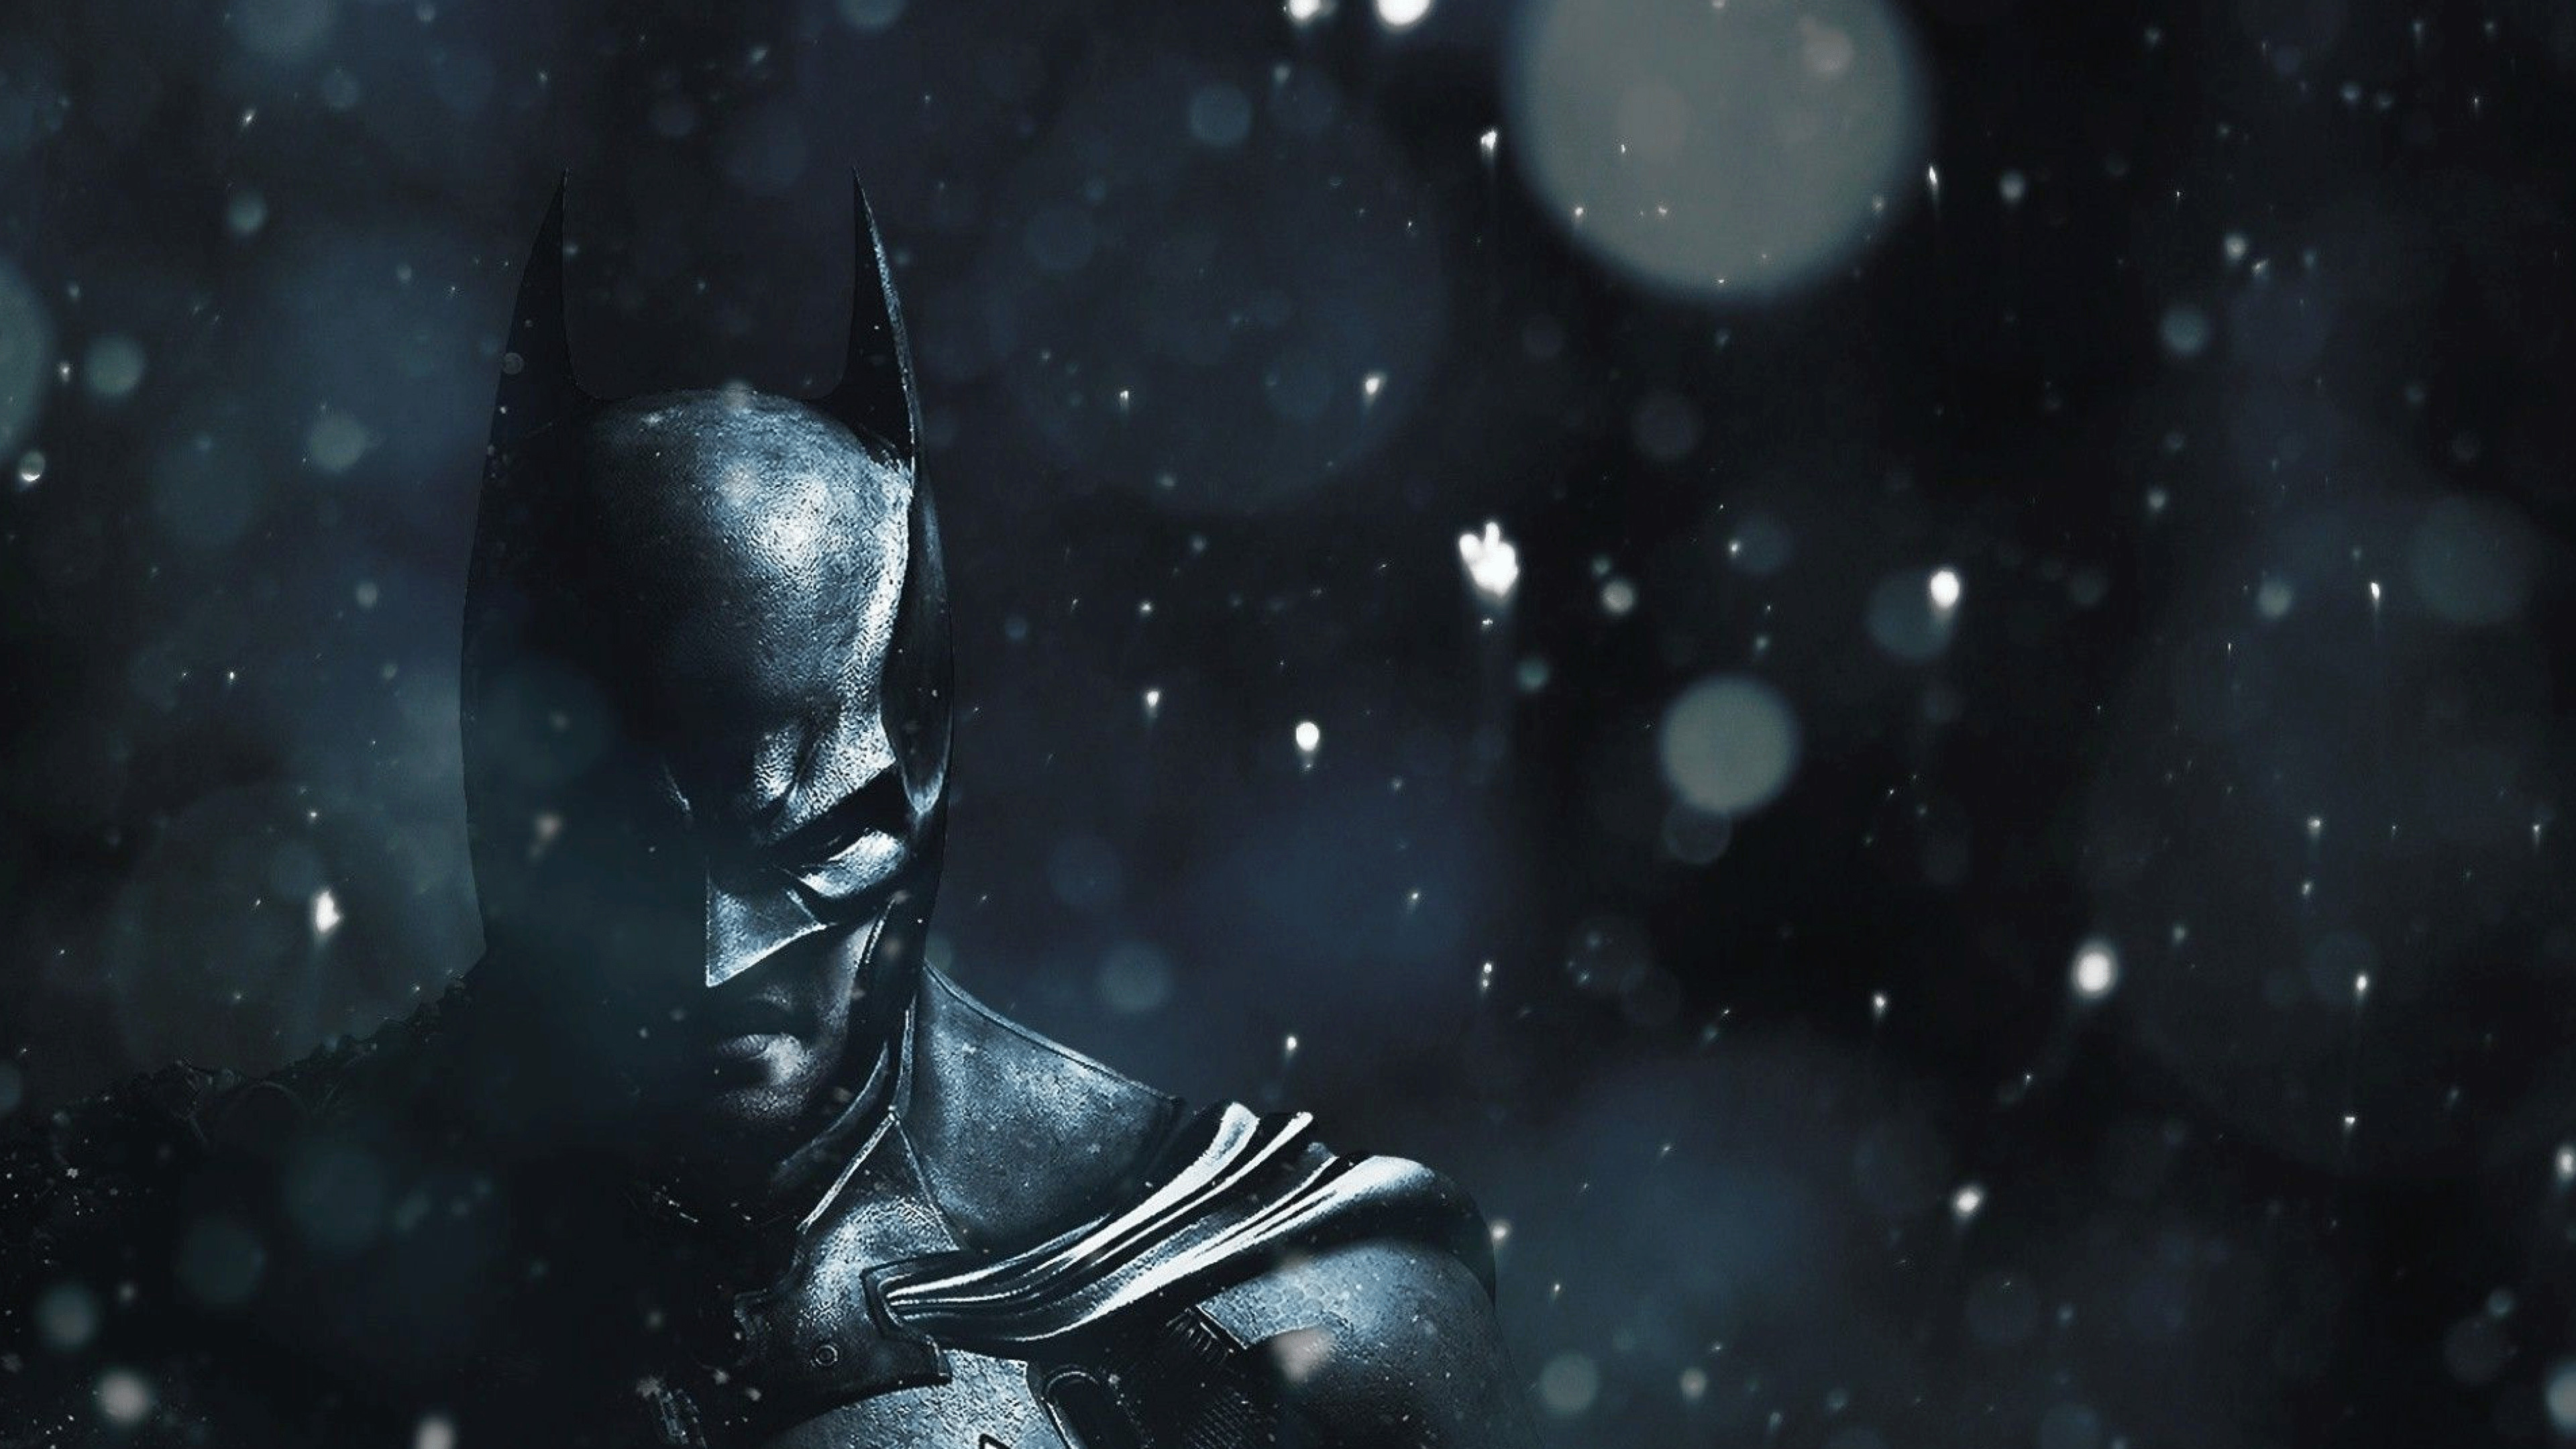 3840x2160 Collection of Batman Pc Wallpapers on HDWallpapers Batman Wallpapers  Wallpapers)